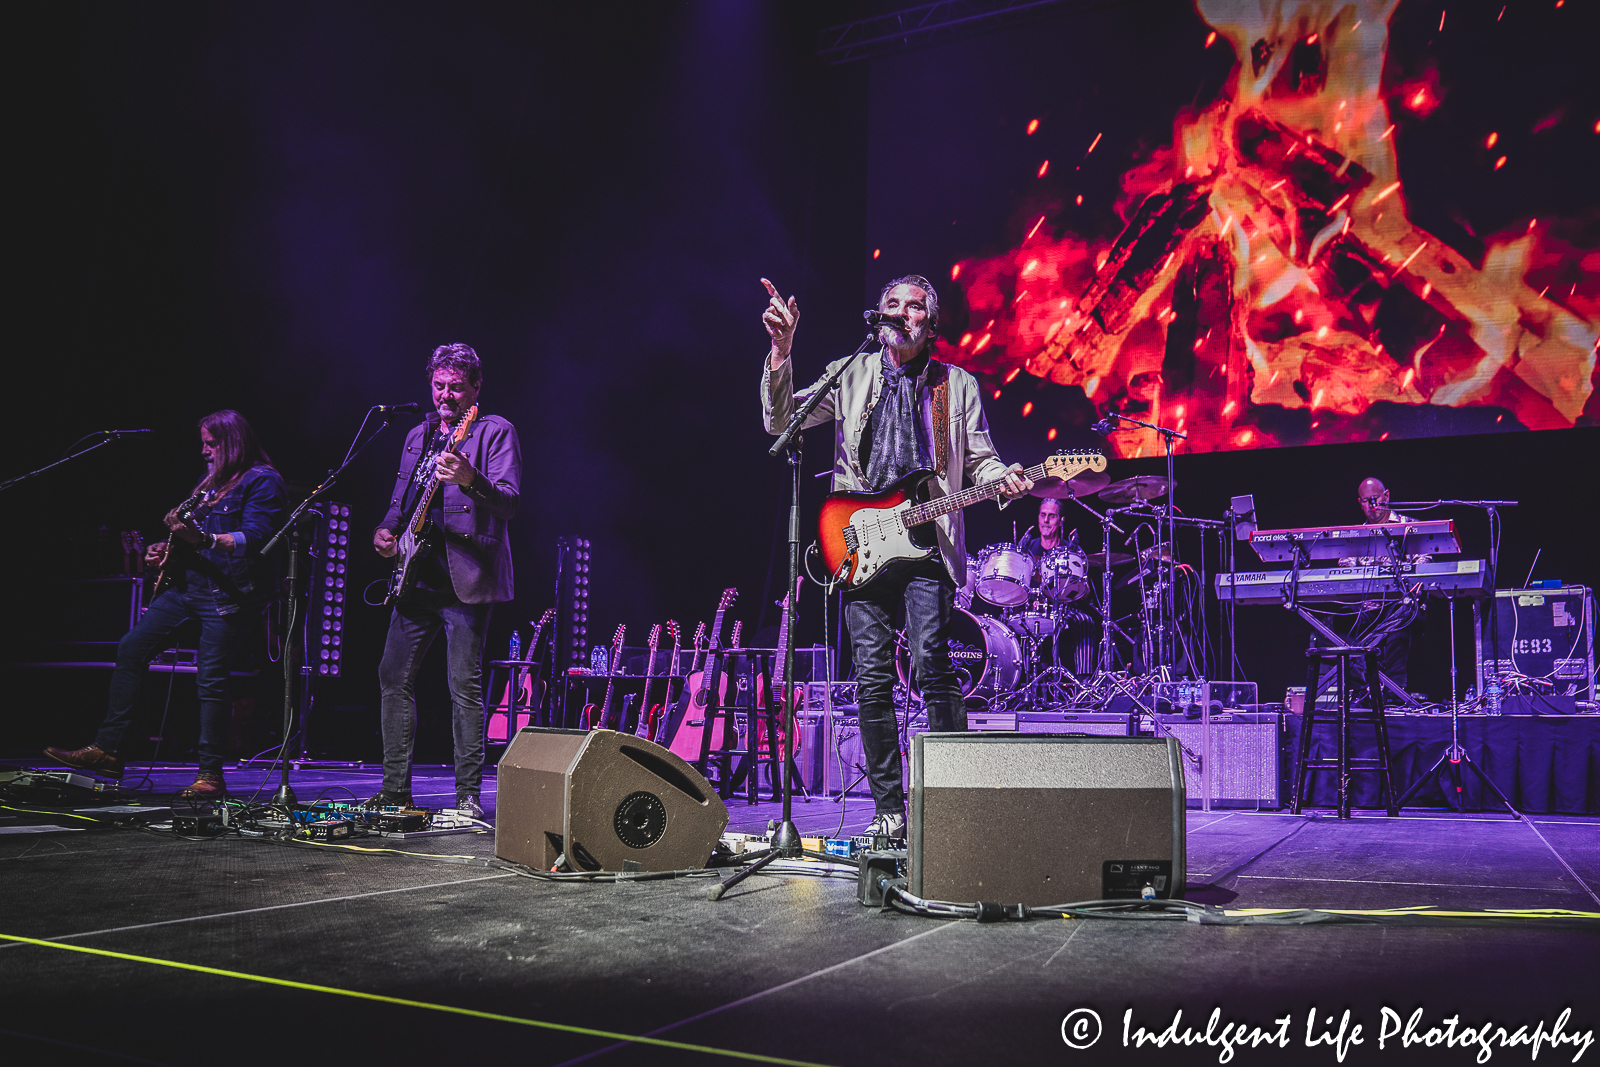 Kenny Loggins performing "Keep the Fire" during his "This Is It!" farewell tour stop at The Family Arena in St. Charles, MO on August 17, 2023.